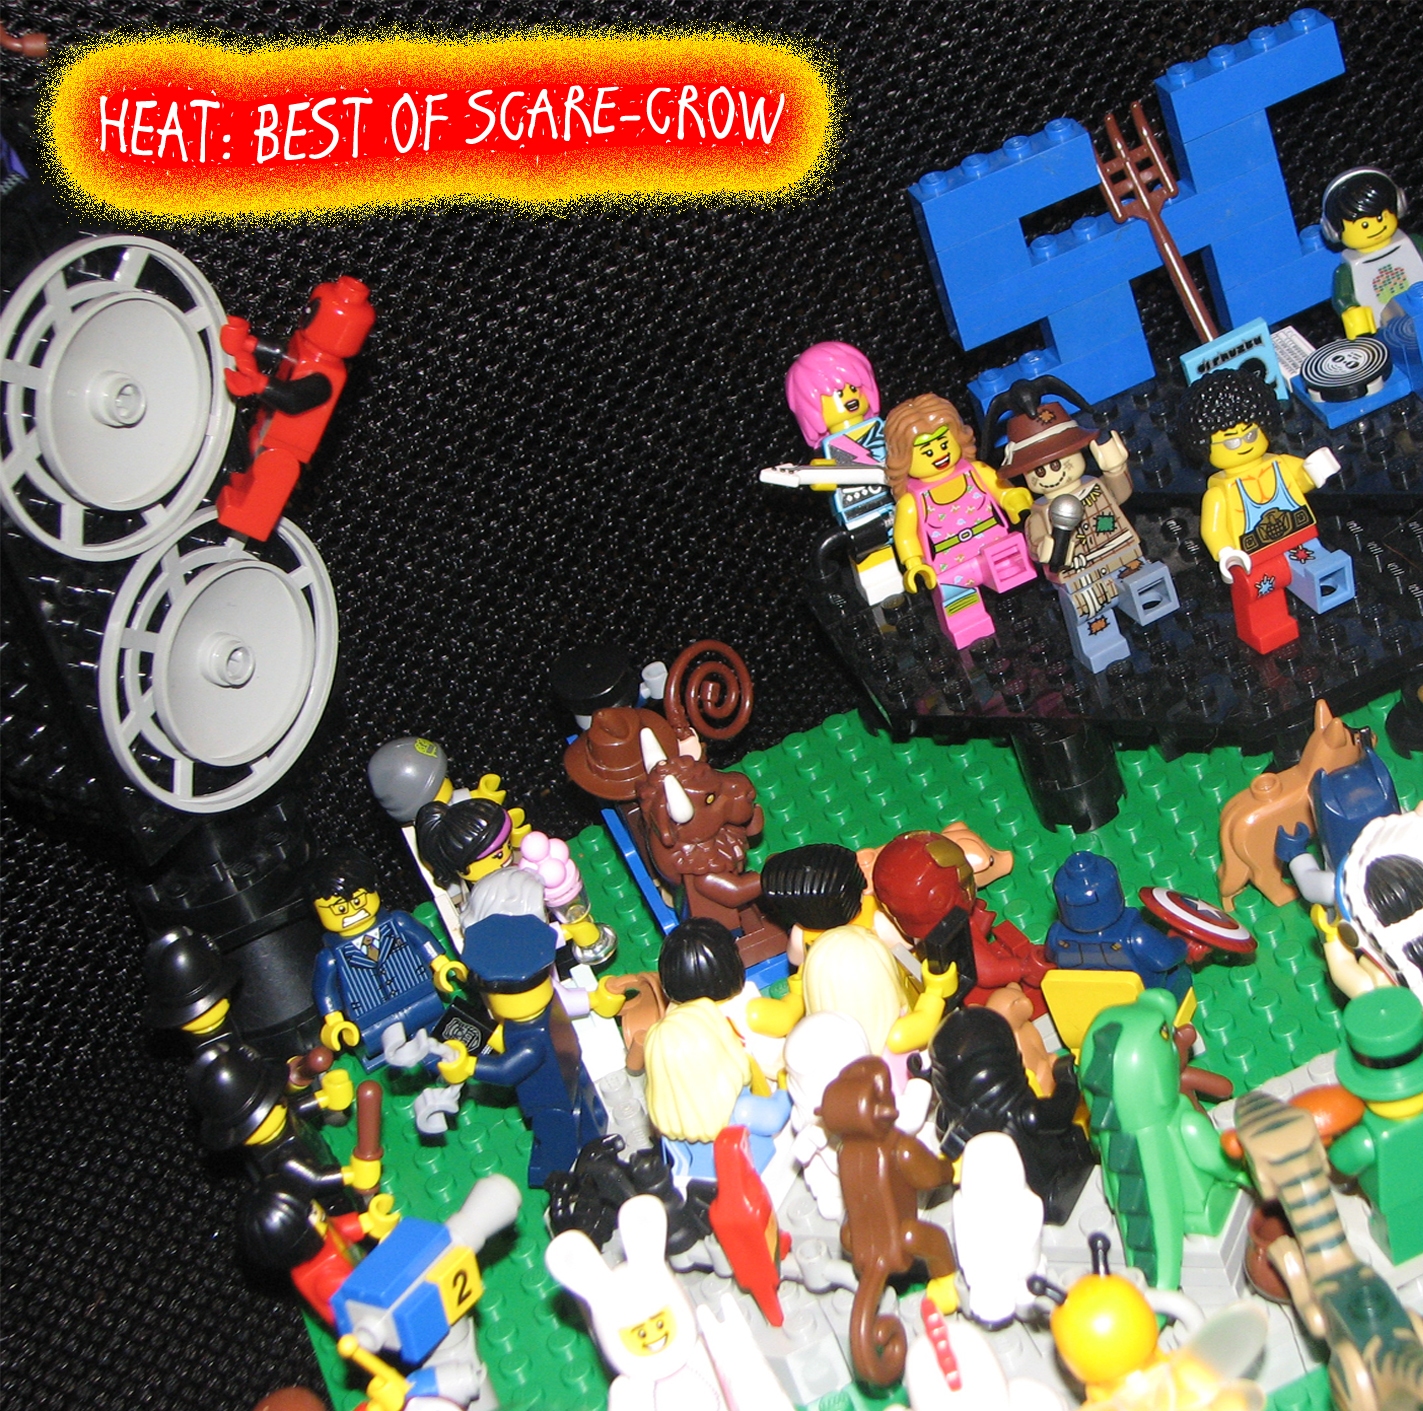 Heat (Best of Scare-Crow) front cover copy